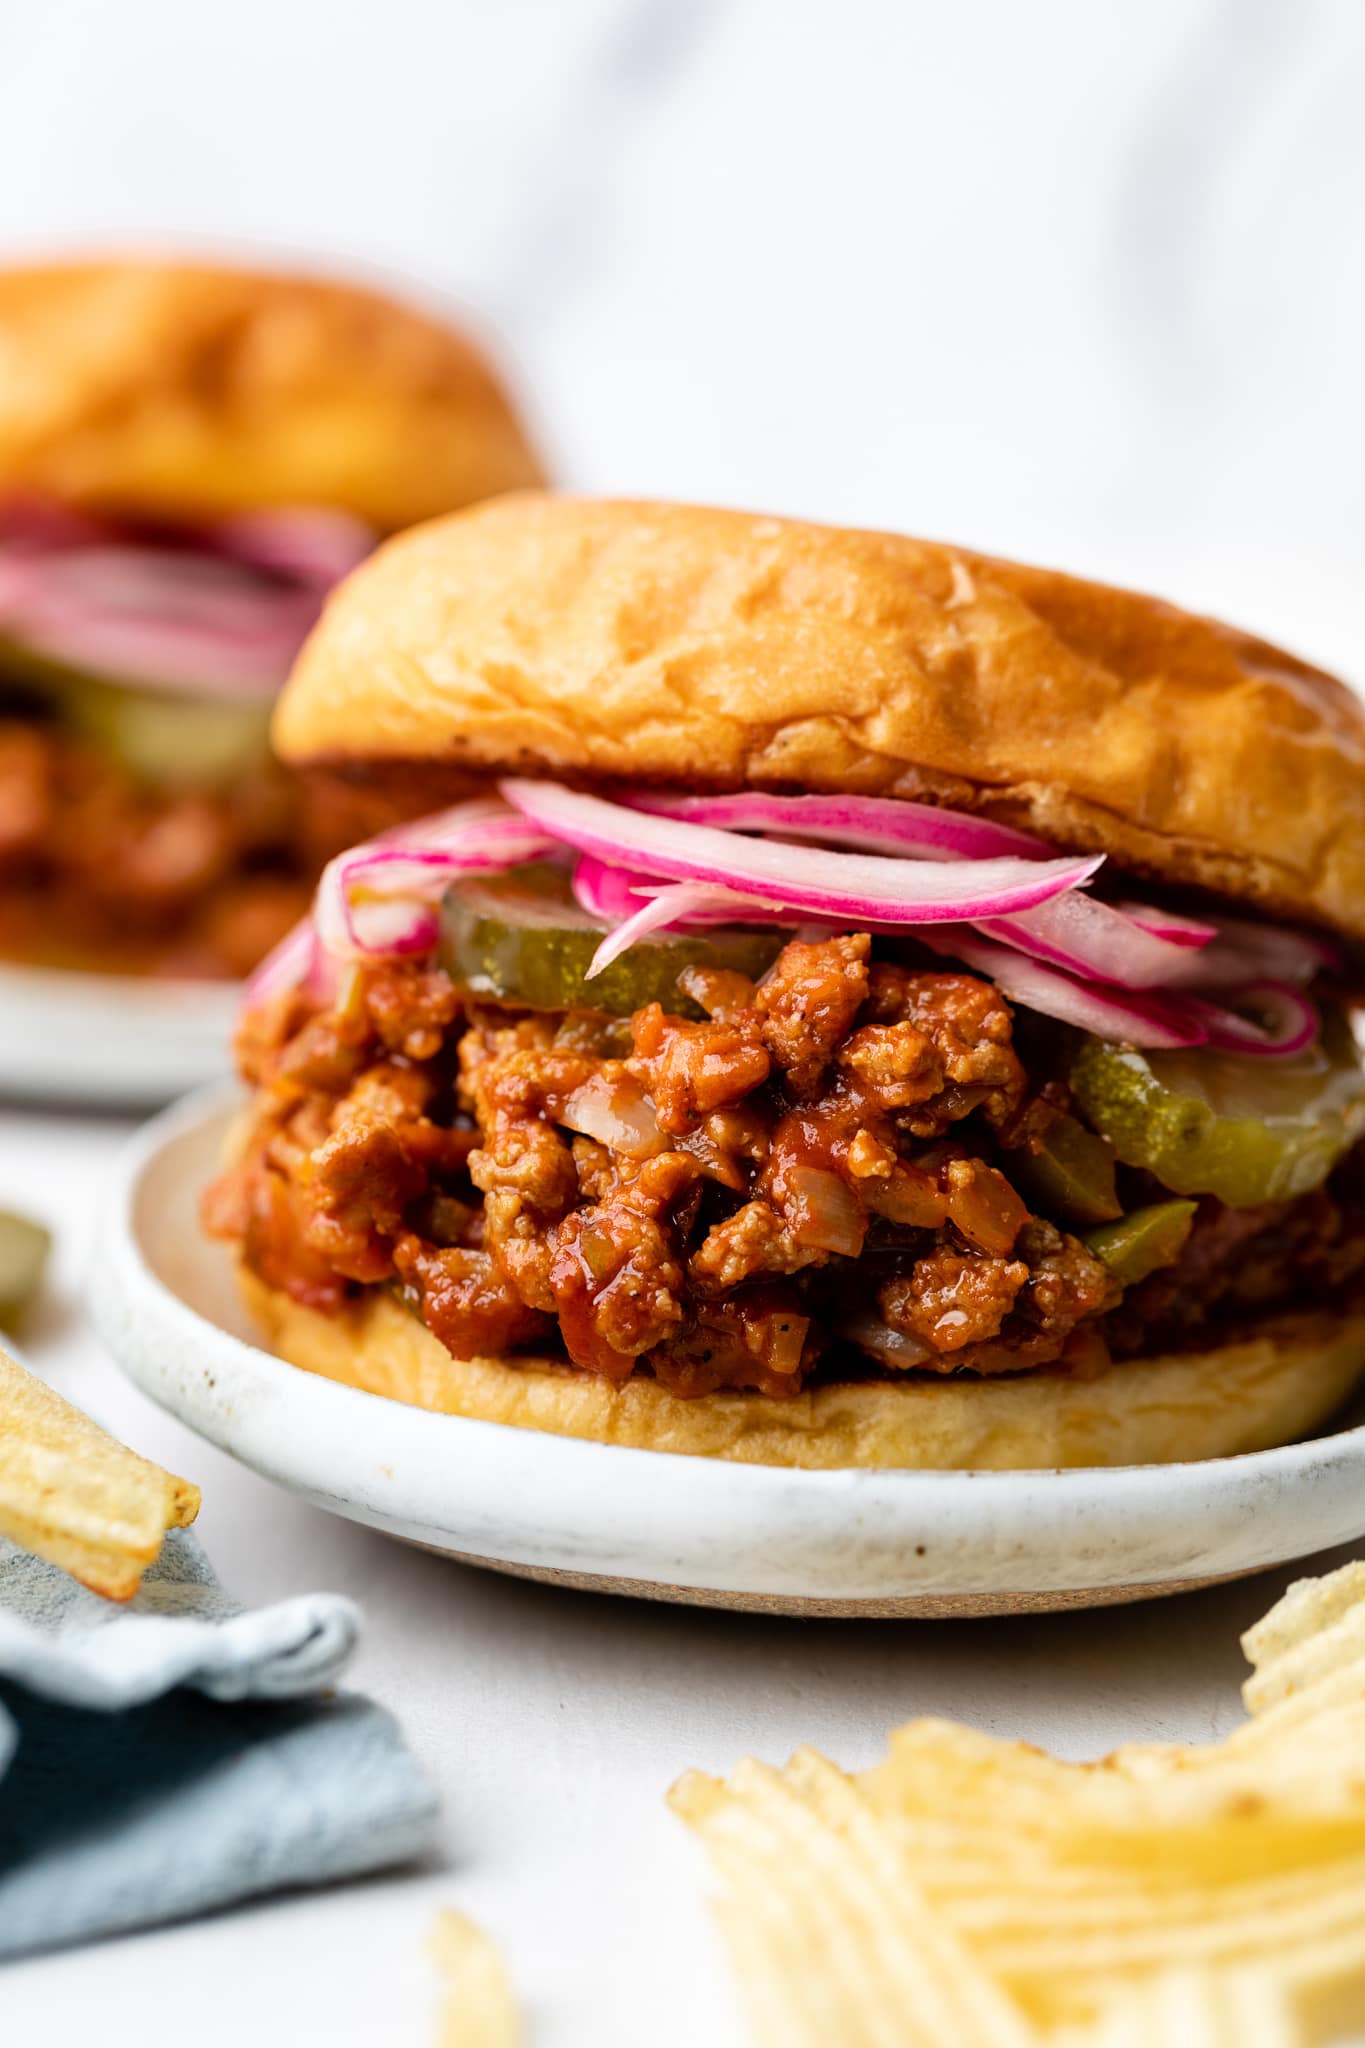 Turkey Sloppy Joes All The Healthy Things